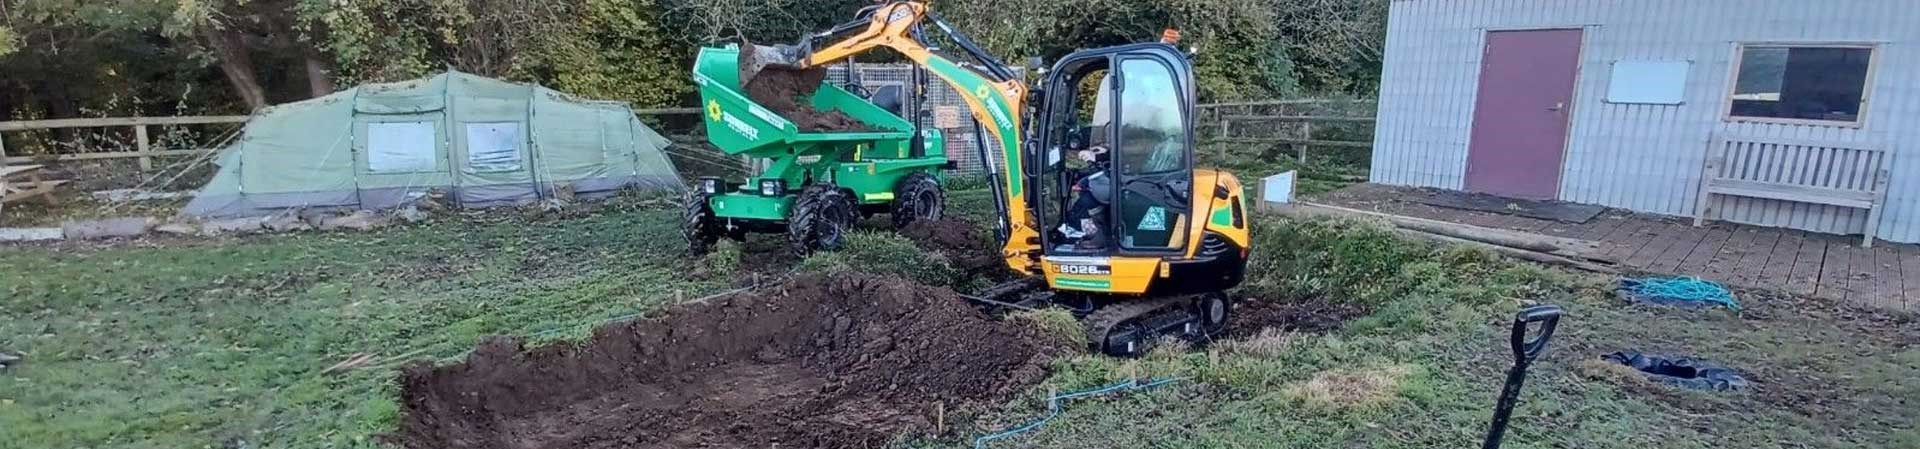 Mini Digger Unloading Dirt Into A Dumper On Patch Of Grass Worksite